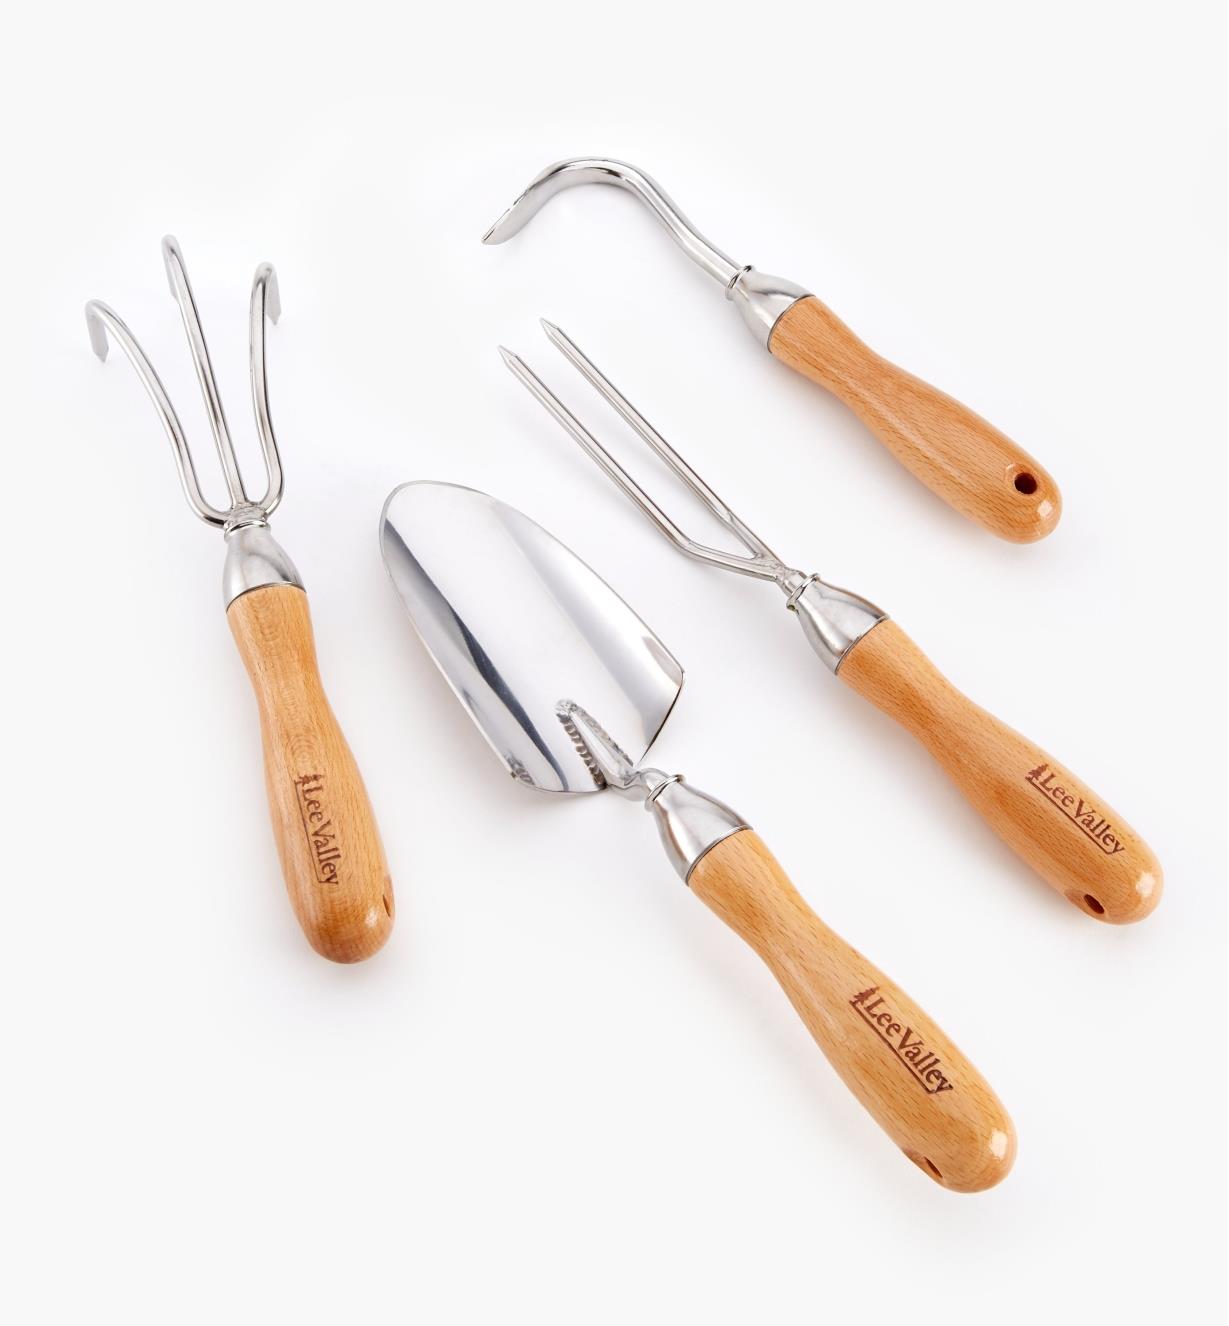 AB631 - Set of 4 Lee Valley Garden Tools